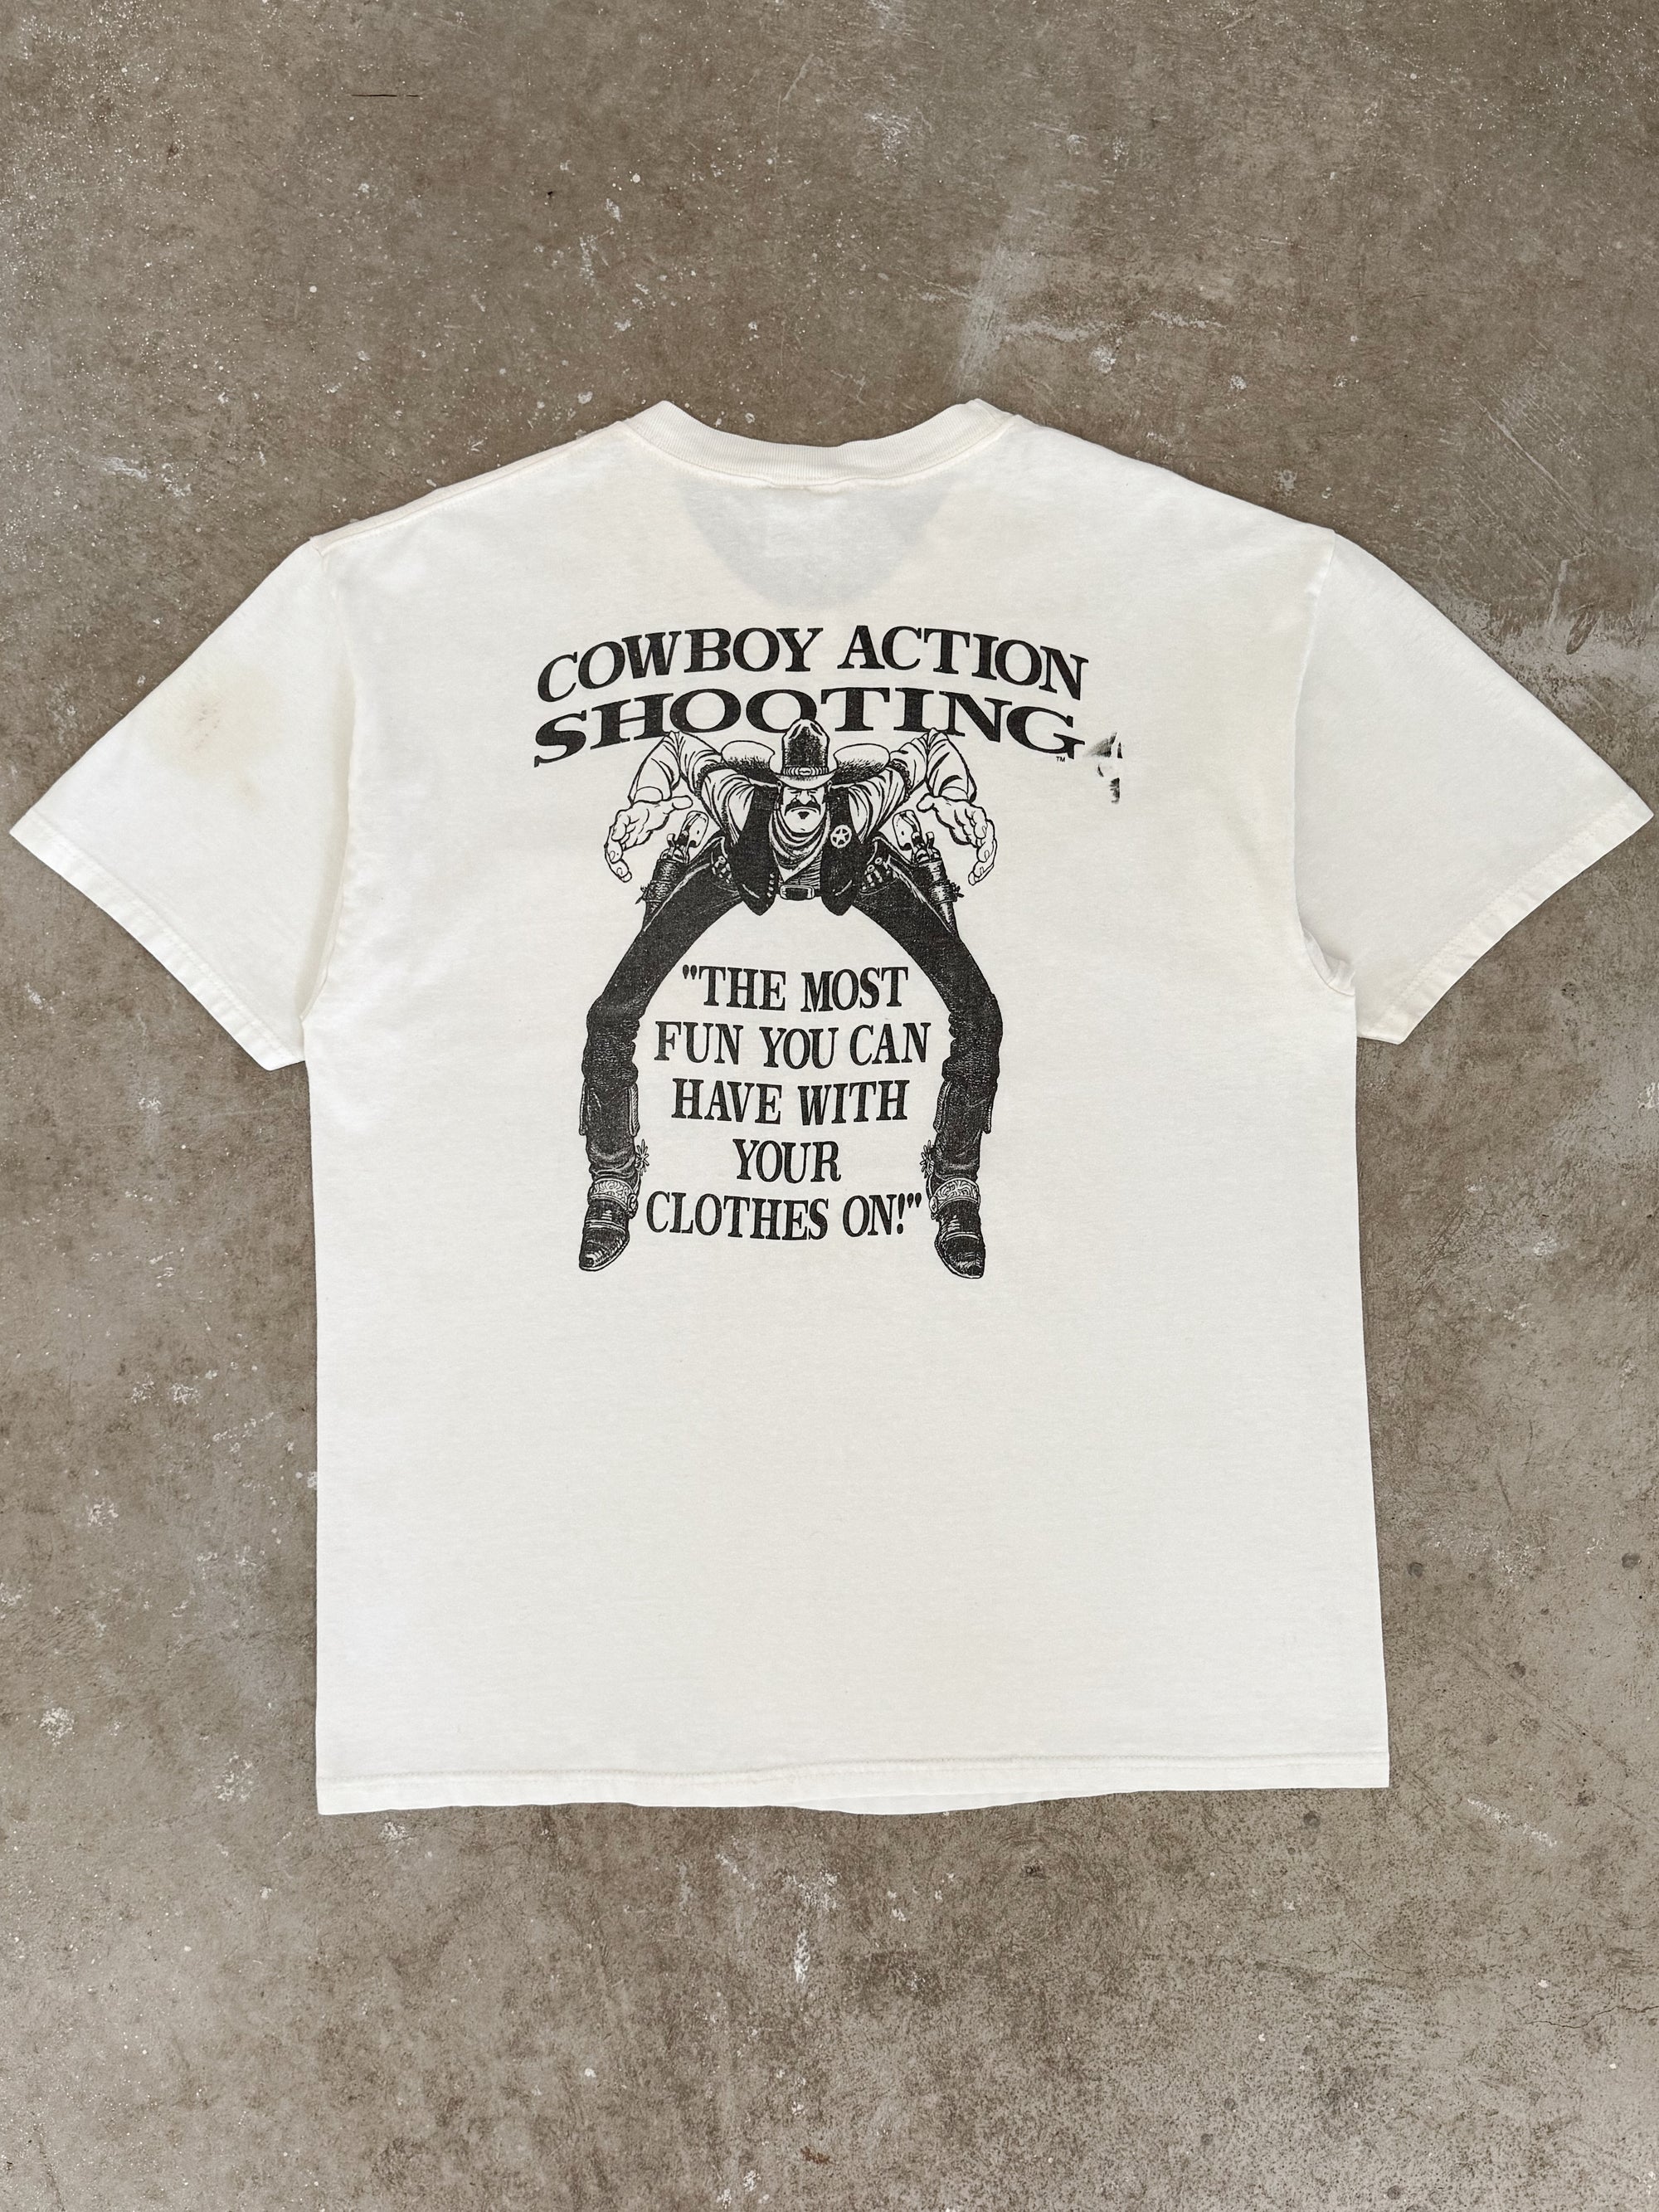 1990s "Cowboy Action Shooting" Tee (L)